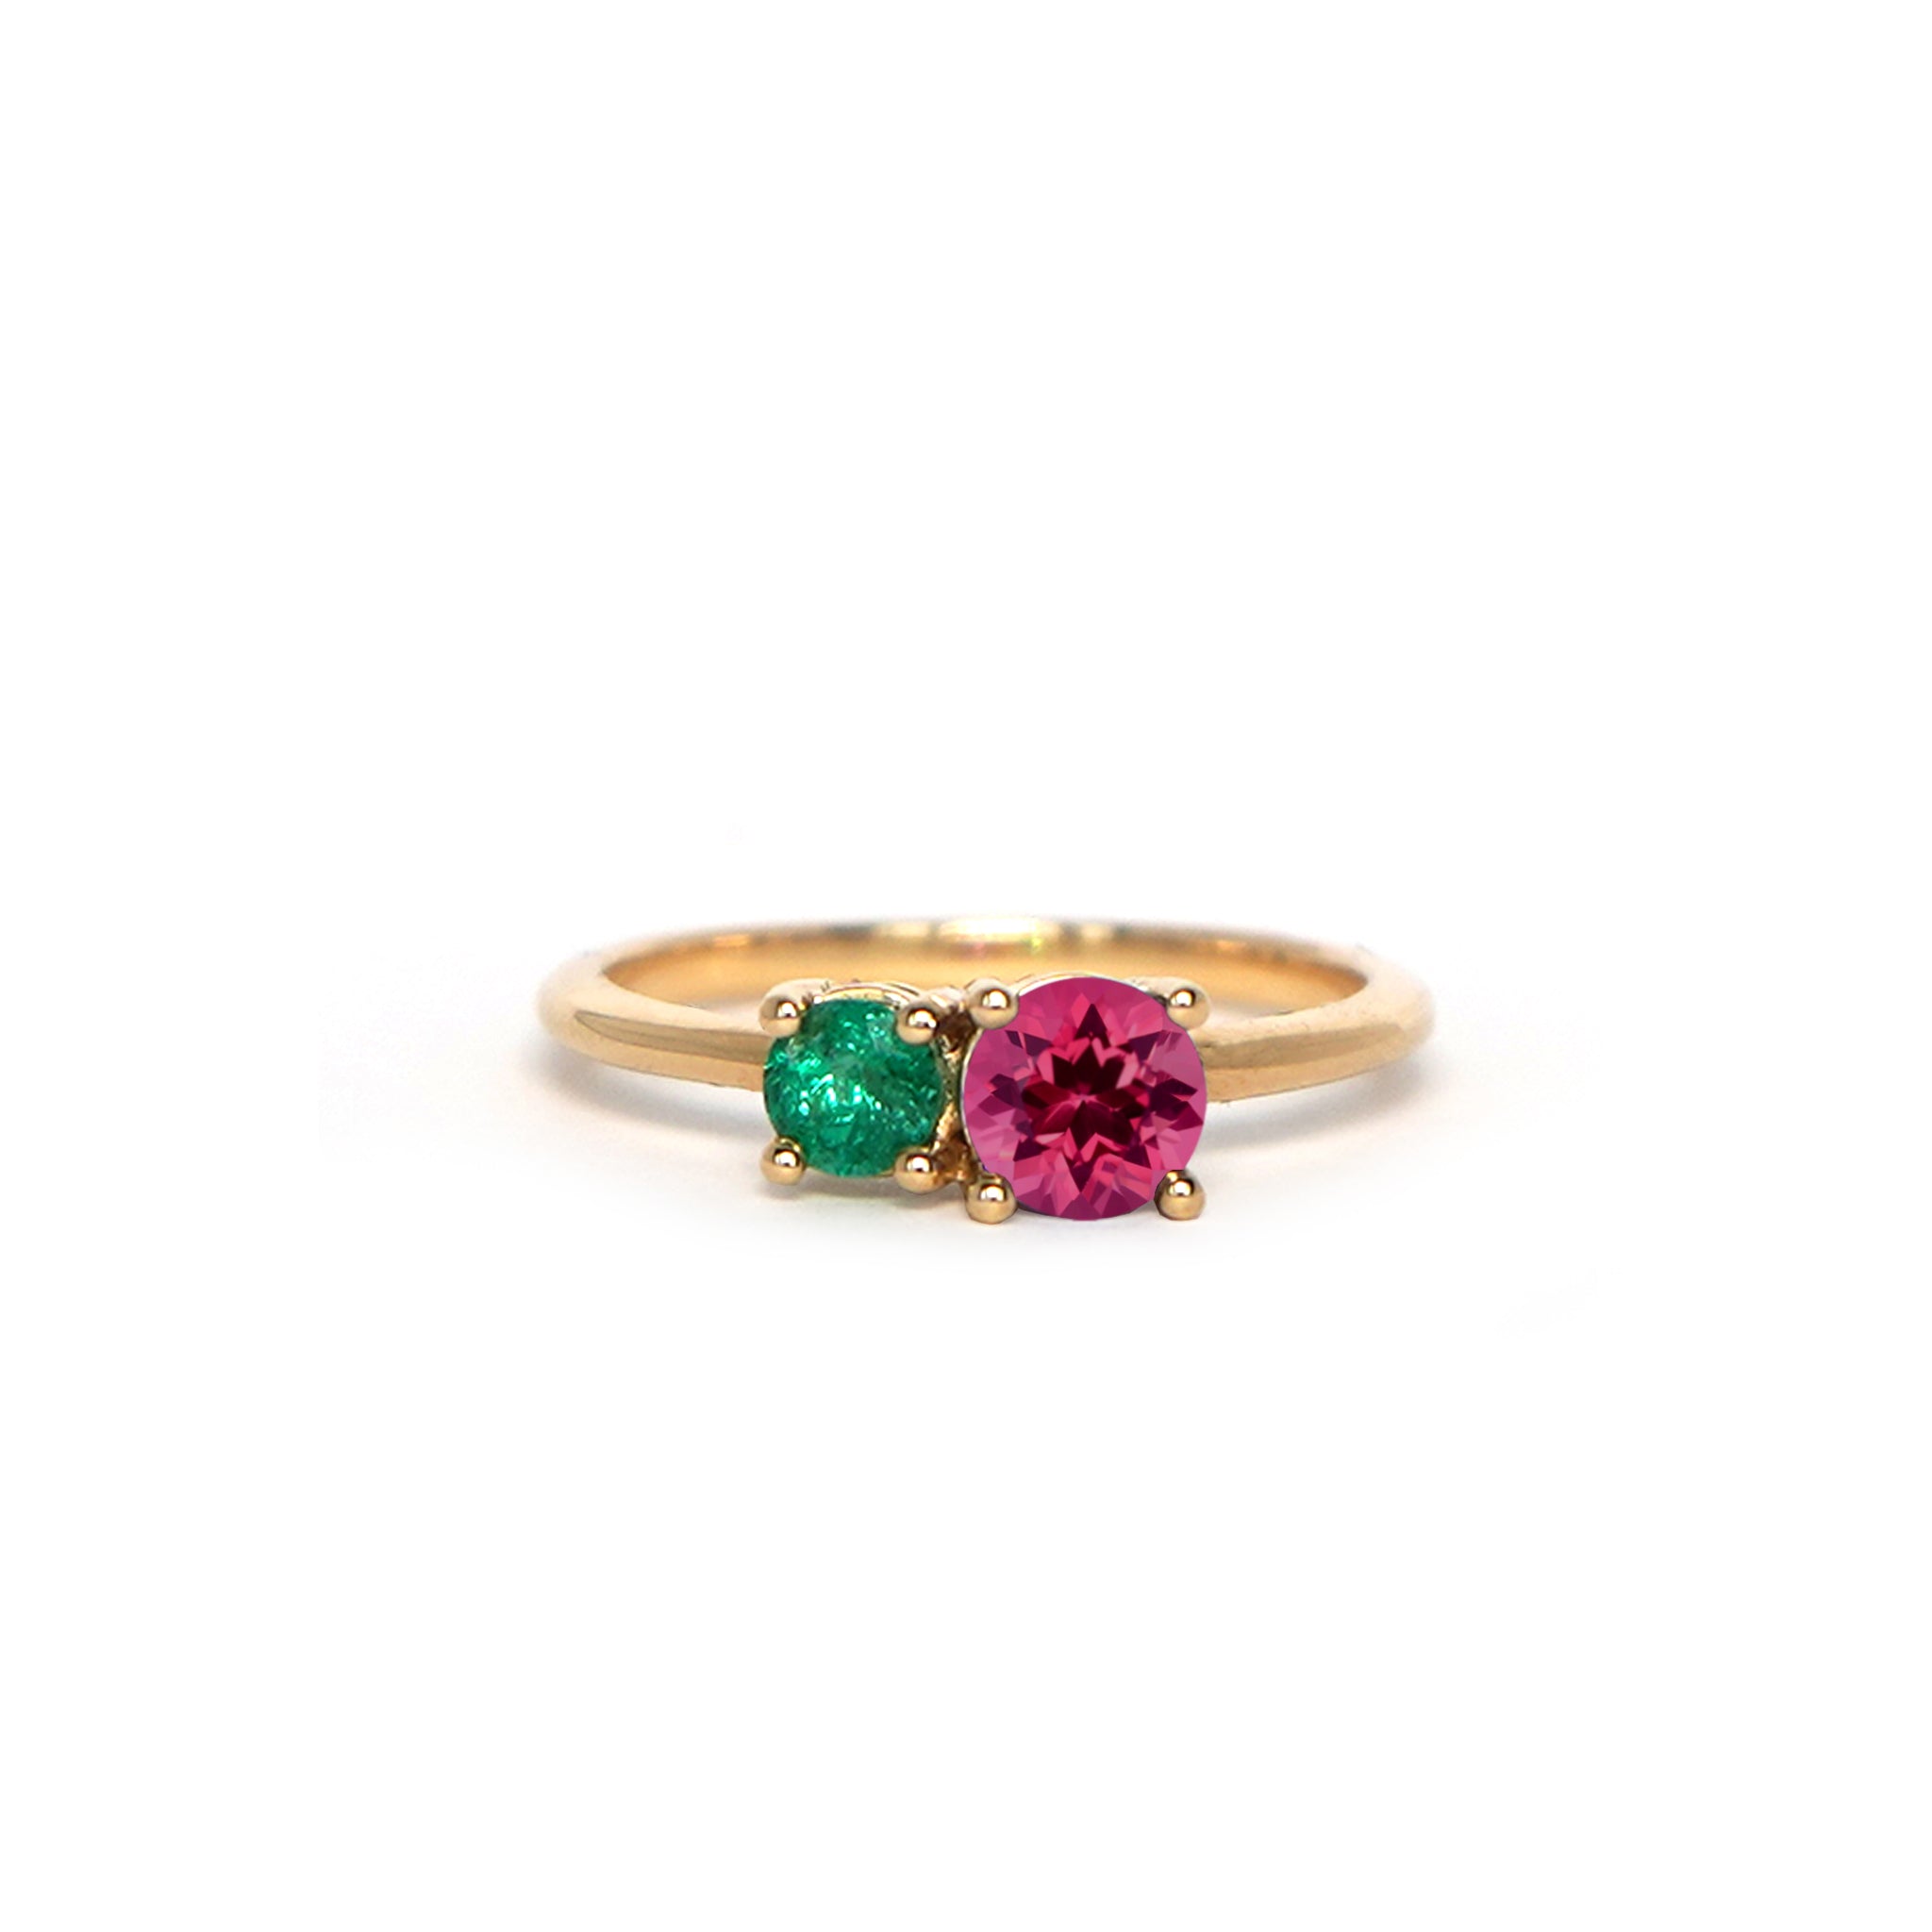 Lico Jewelry's Spring Mix ring with genuine pink tourmaline and Colombian emerald in solid 14k yellow gold.